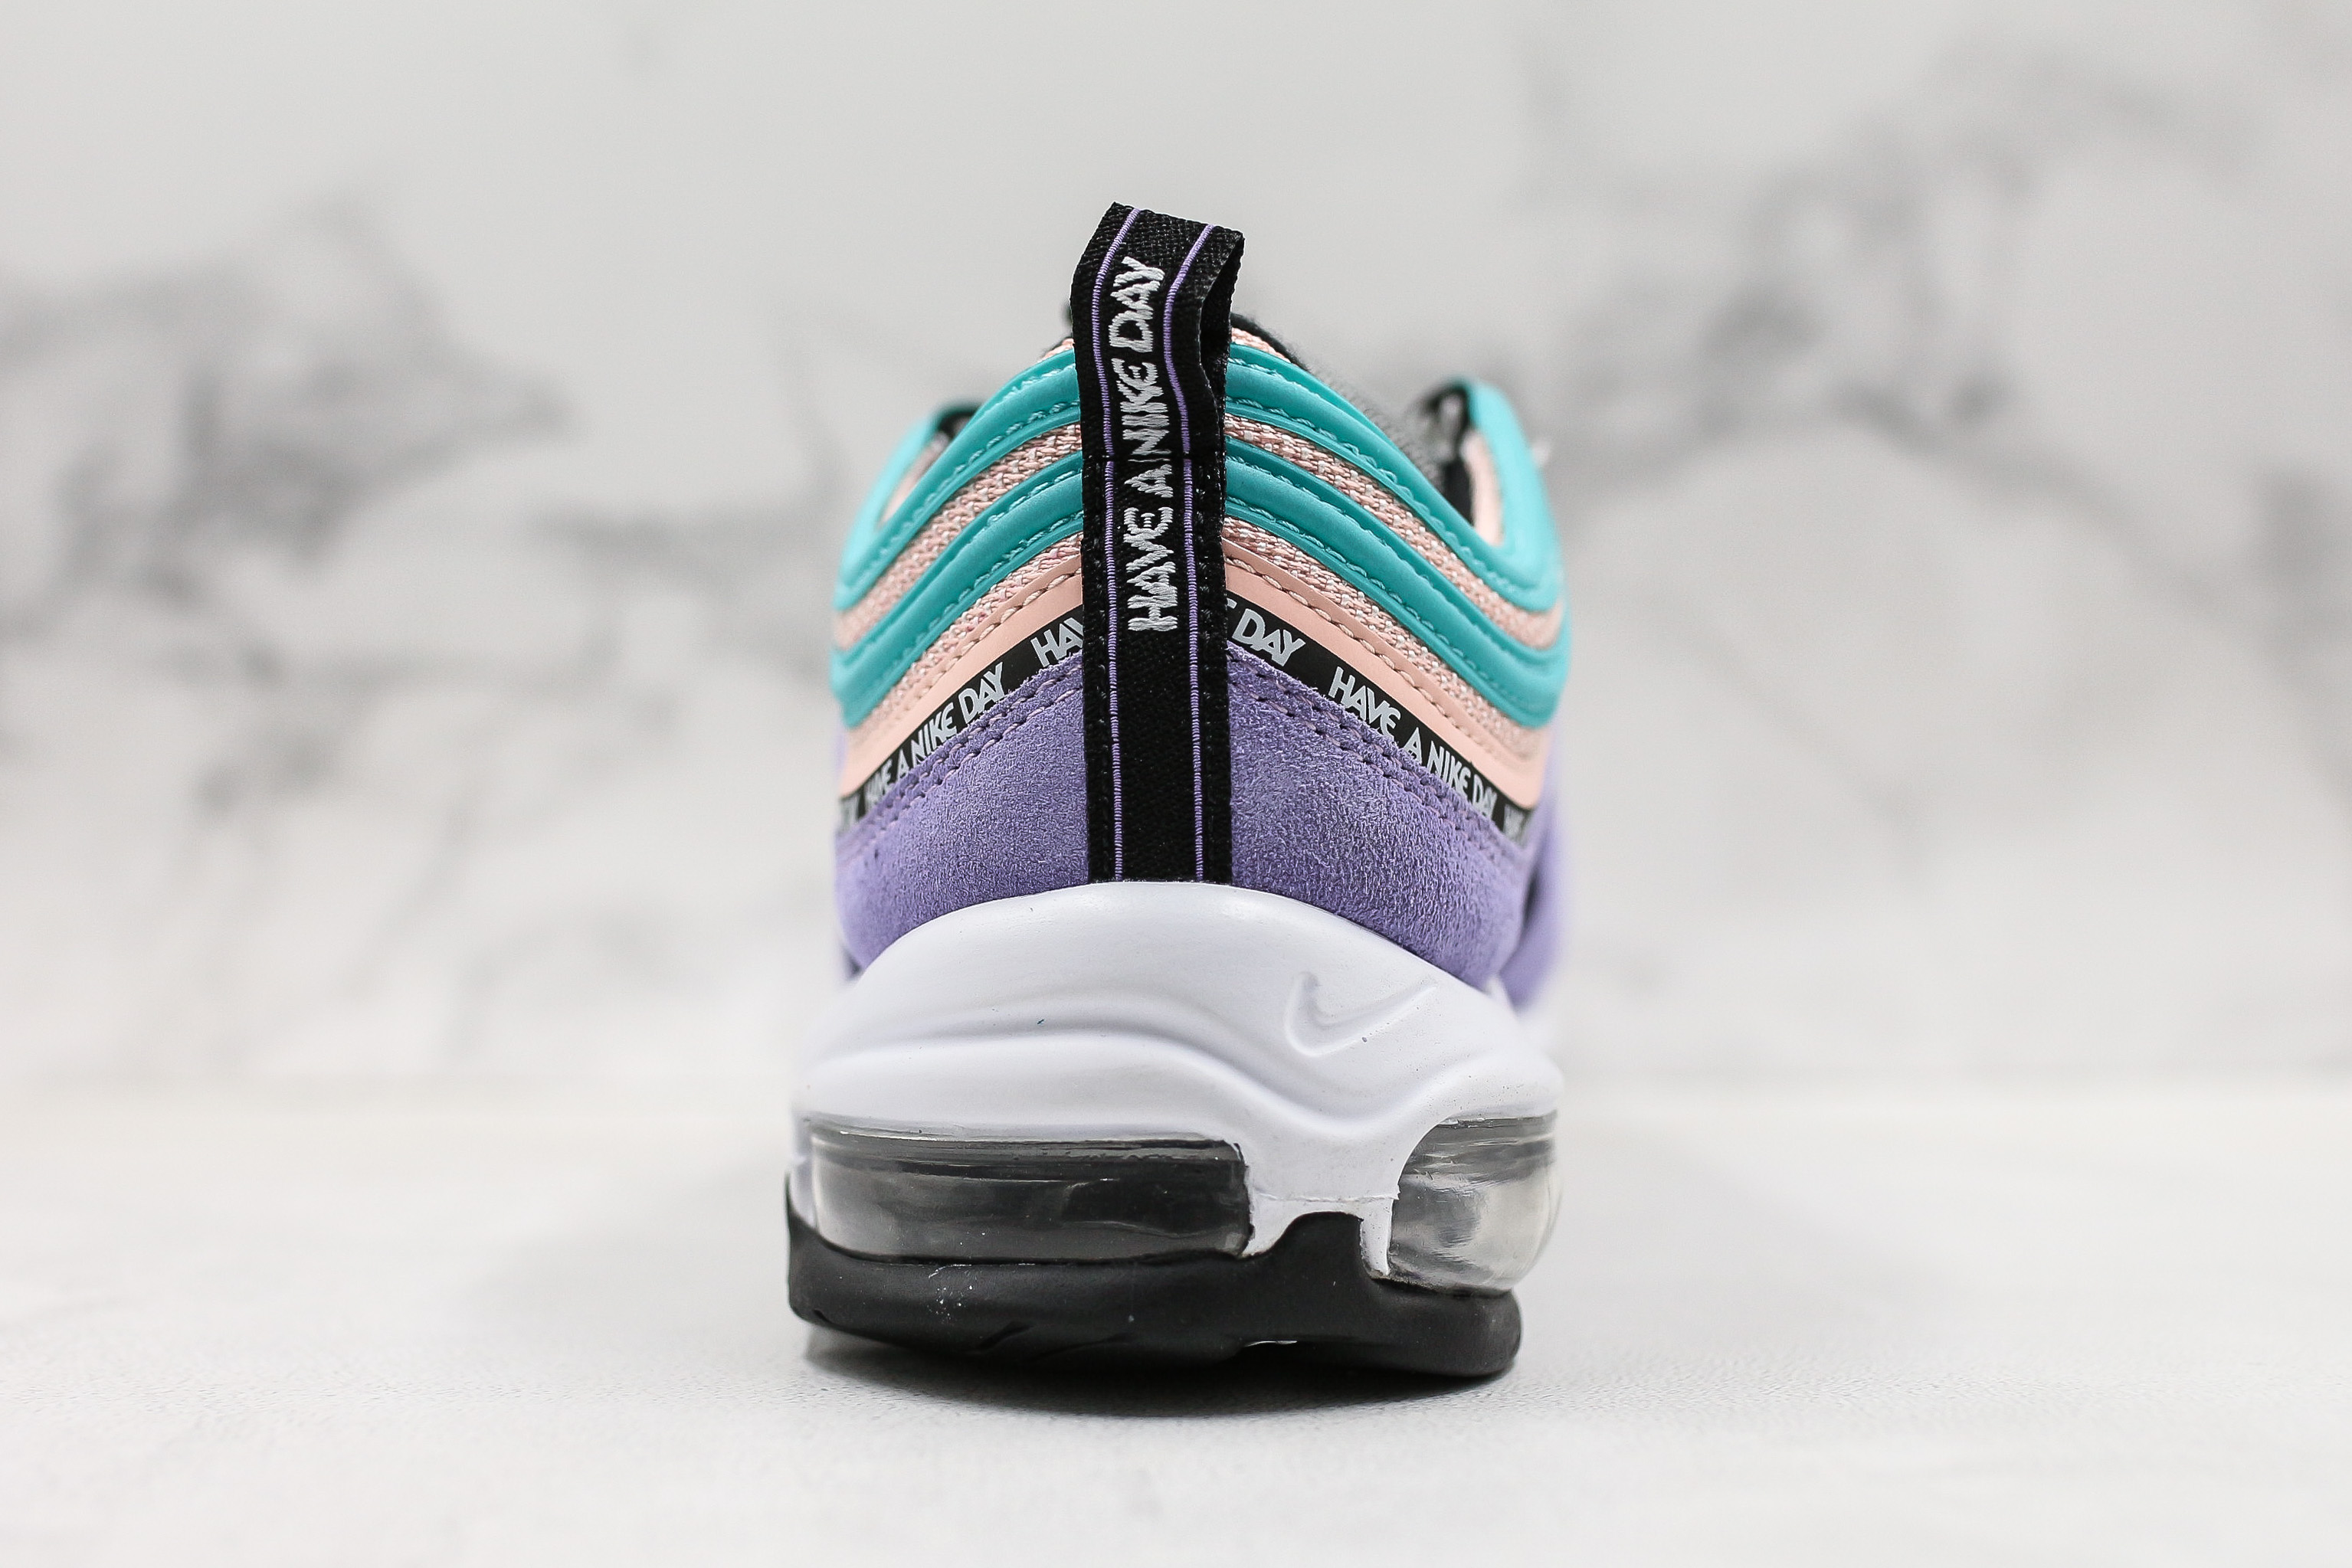 nike air max 97 have a nike day kids